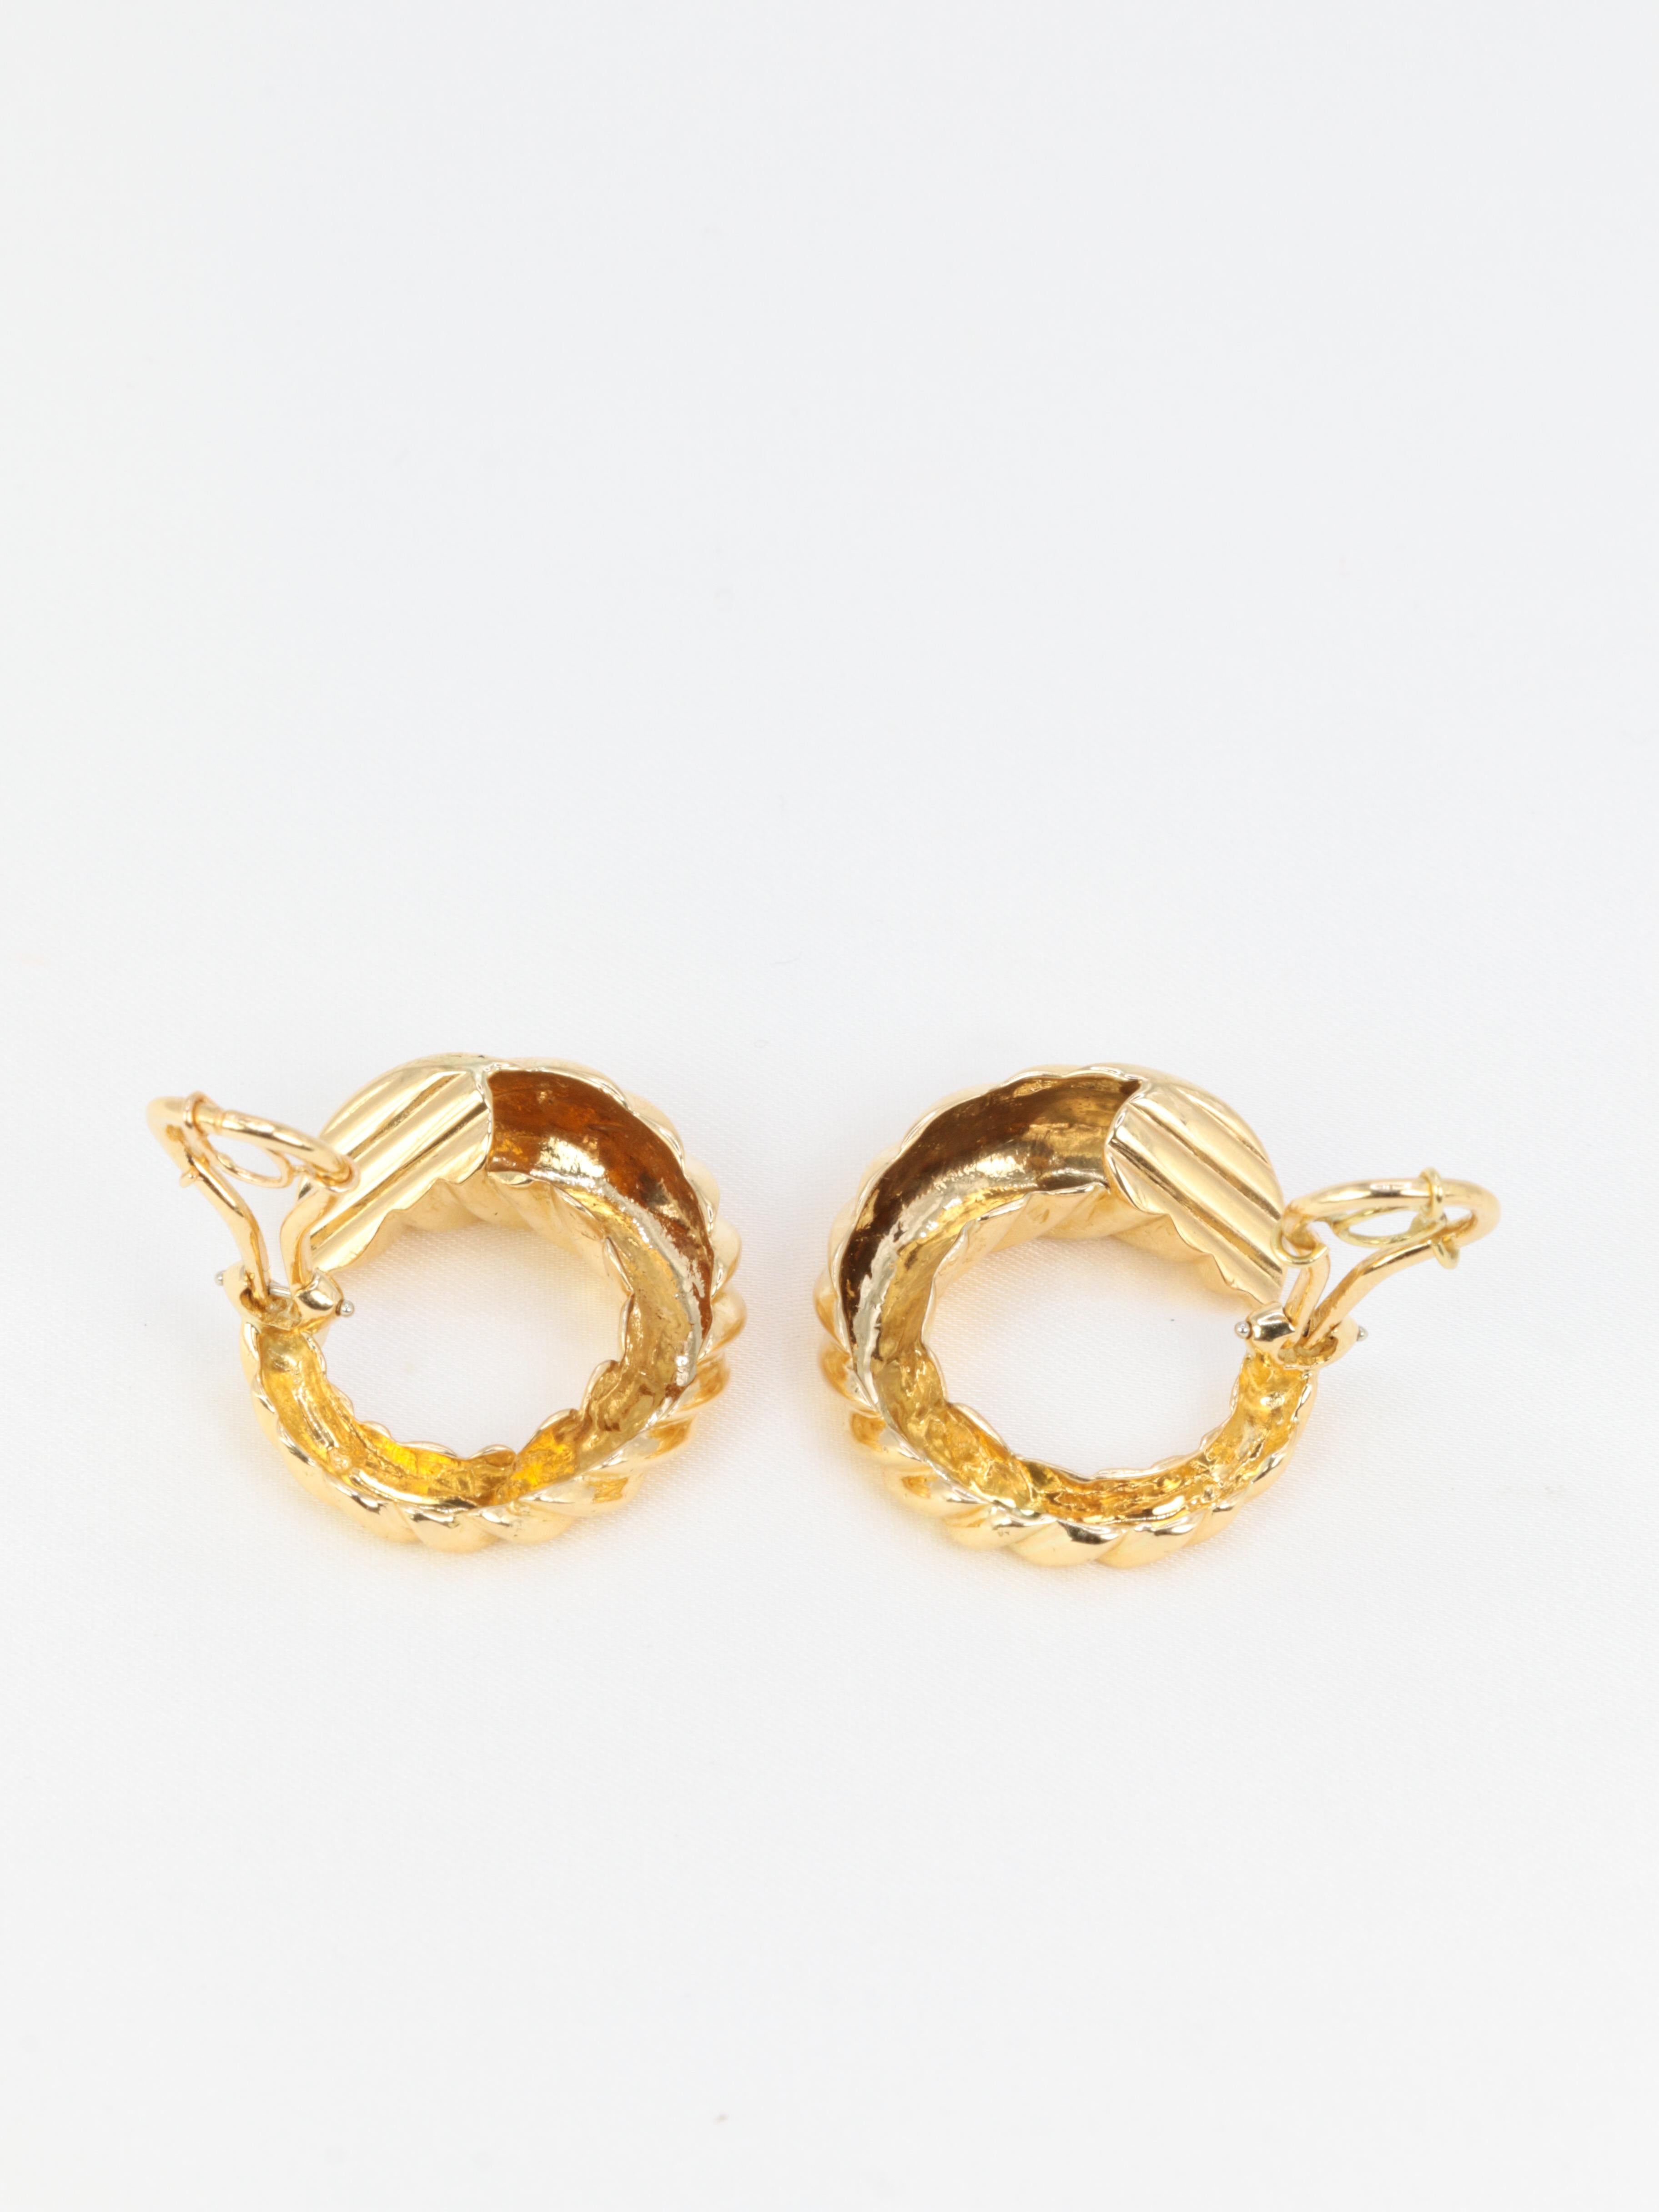 Pair of Vintage Ear Clips in Yellow Gold 2